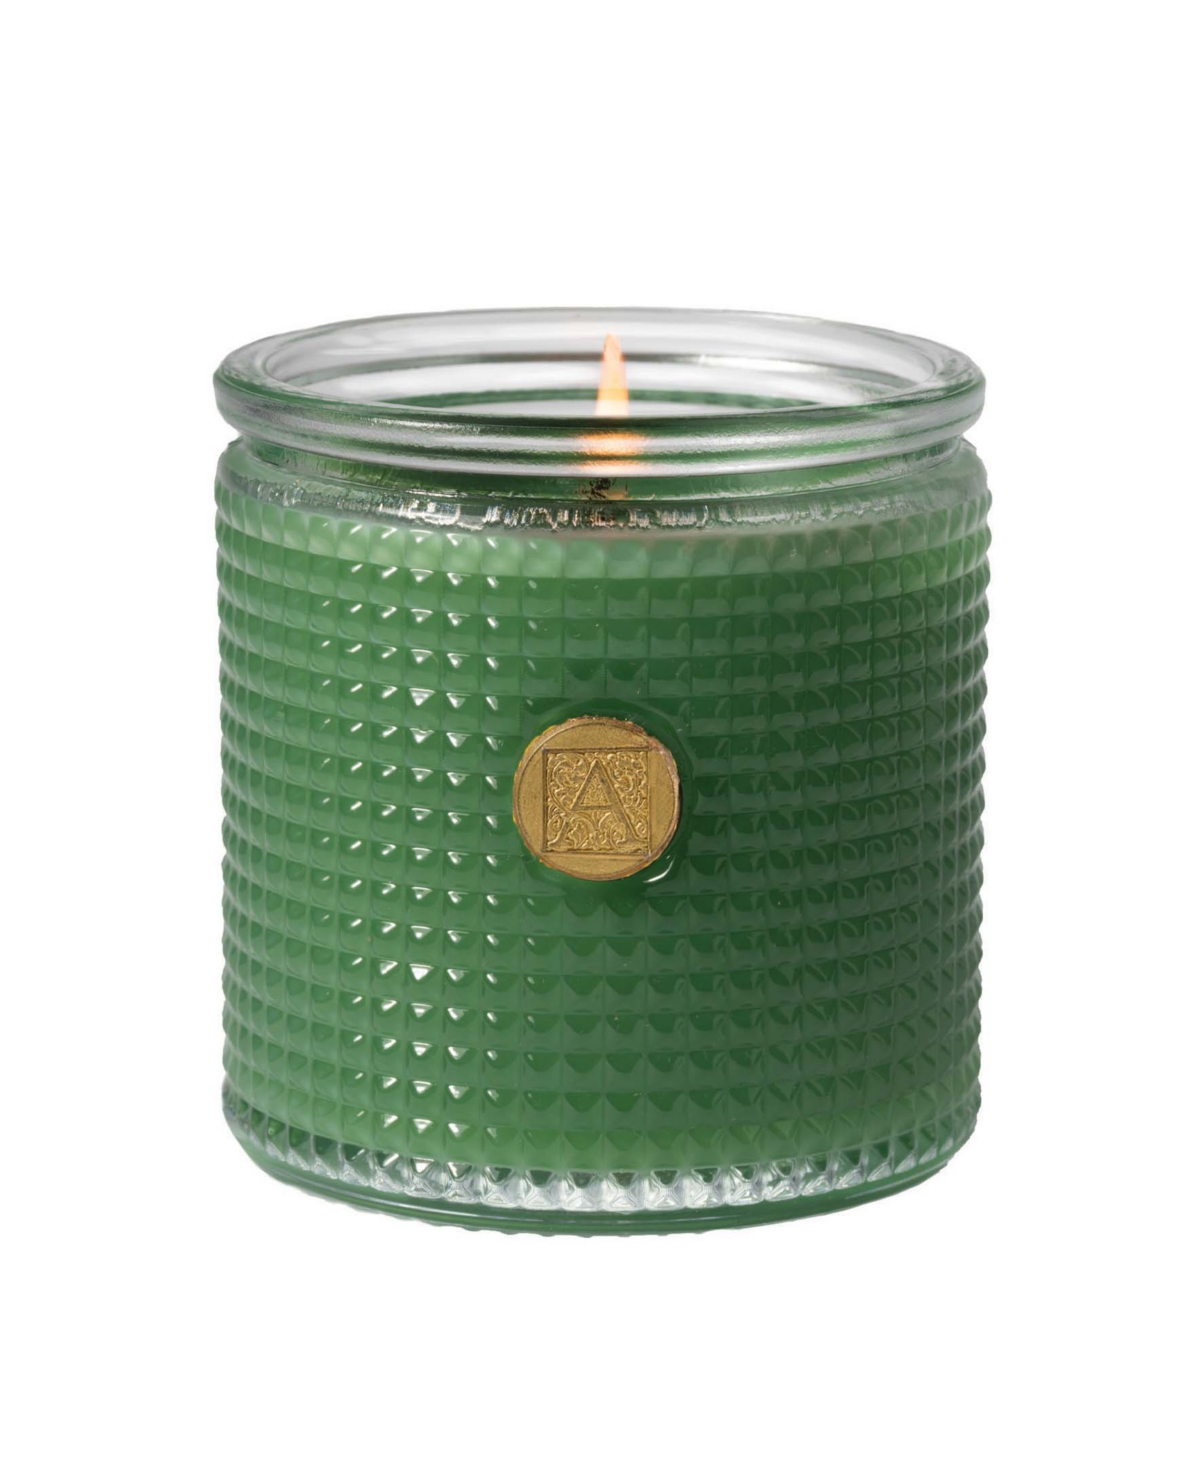 13679989 In The Garden Textured Candle sku 13679989